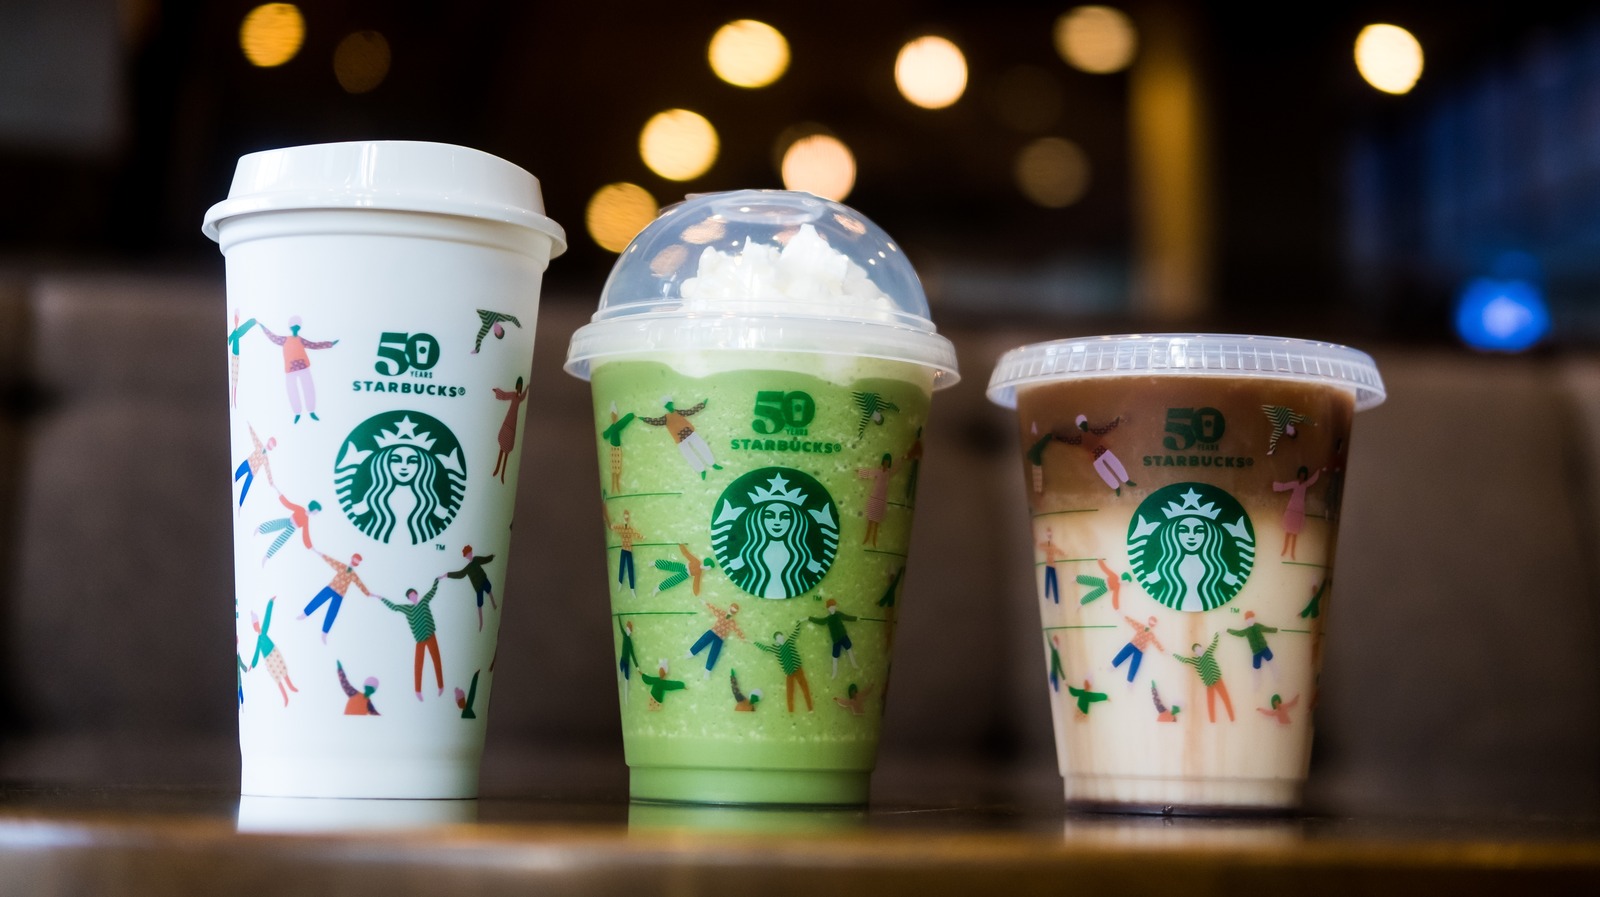 https://www.thedailymeal.com/img/gallery/what-sets-starbucks-cold-foam-apart-from-sweet-cream/l-intro-1671119763.jpg